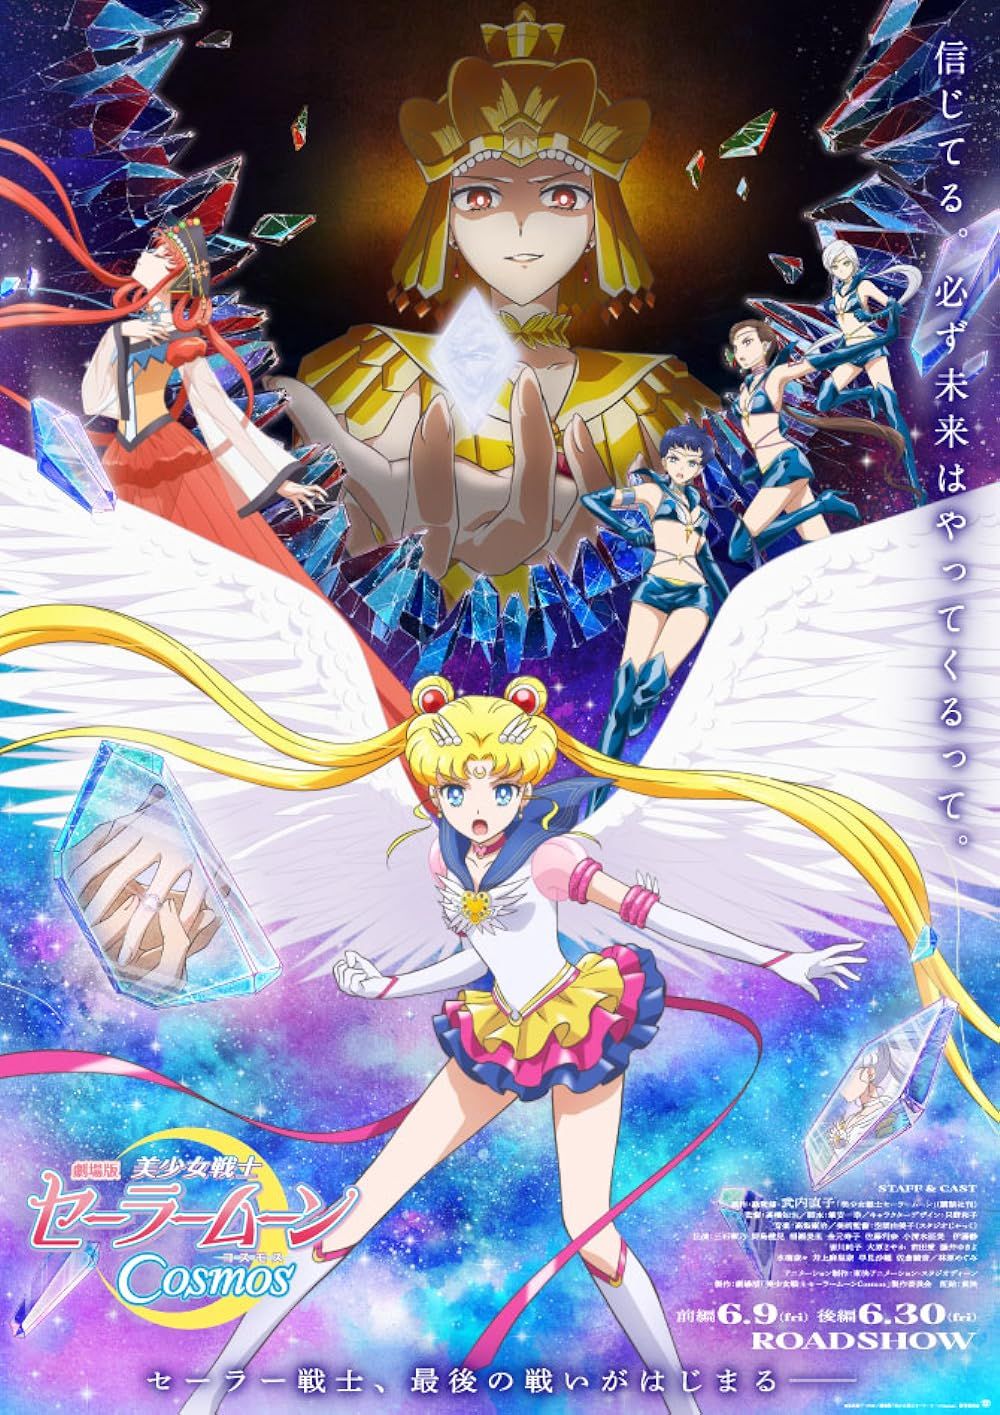 Sailor Moon Cosmos' poster with Sailor Moon on the bottom and Sailor Galaxia on top